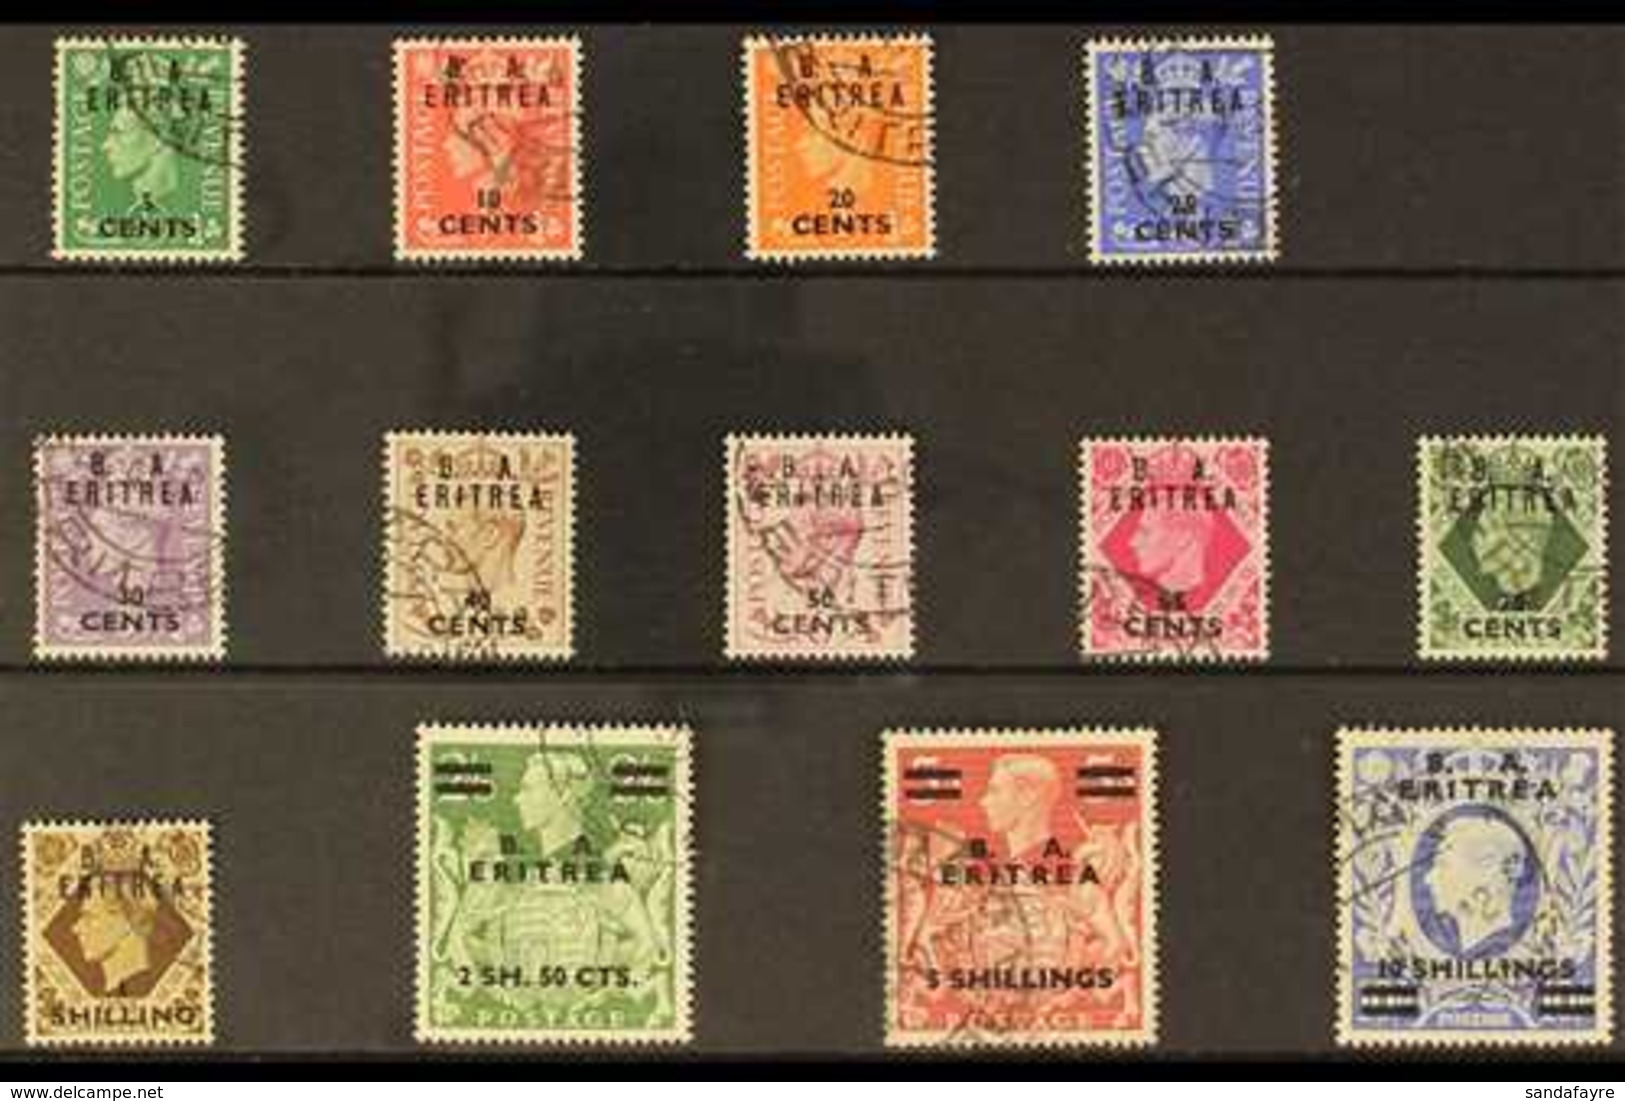 ERITREA  1950 "B A ERITREA" Overprinted Set, SG E13/25, Fine Cds Used (13 Stamps) For More Images, Please Visit Http://w - Italienisch Ost-Afrika